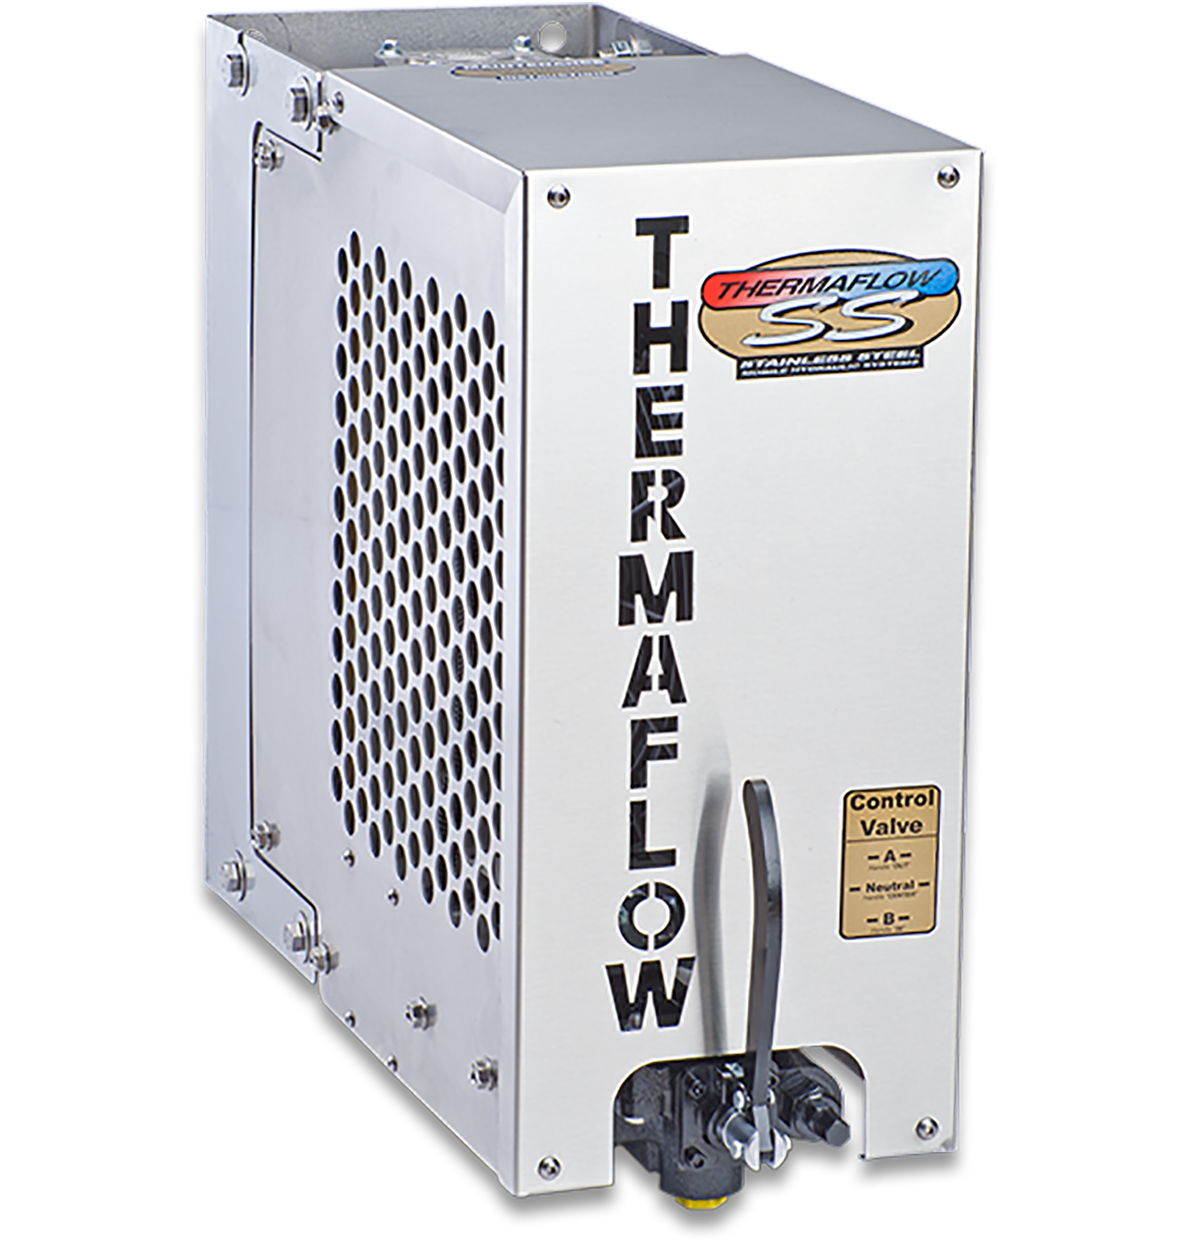 Thermaflow SS934